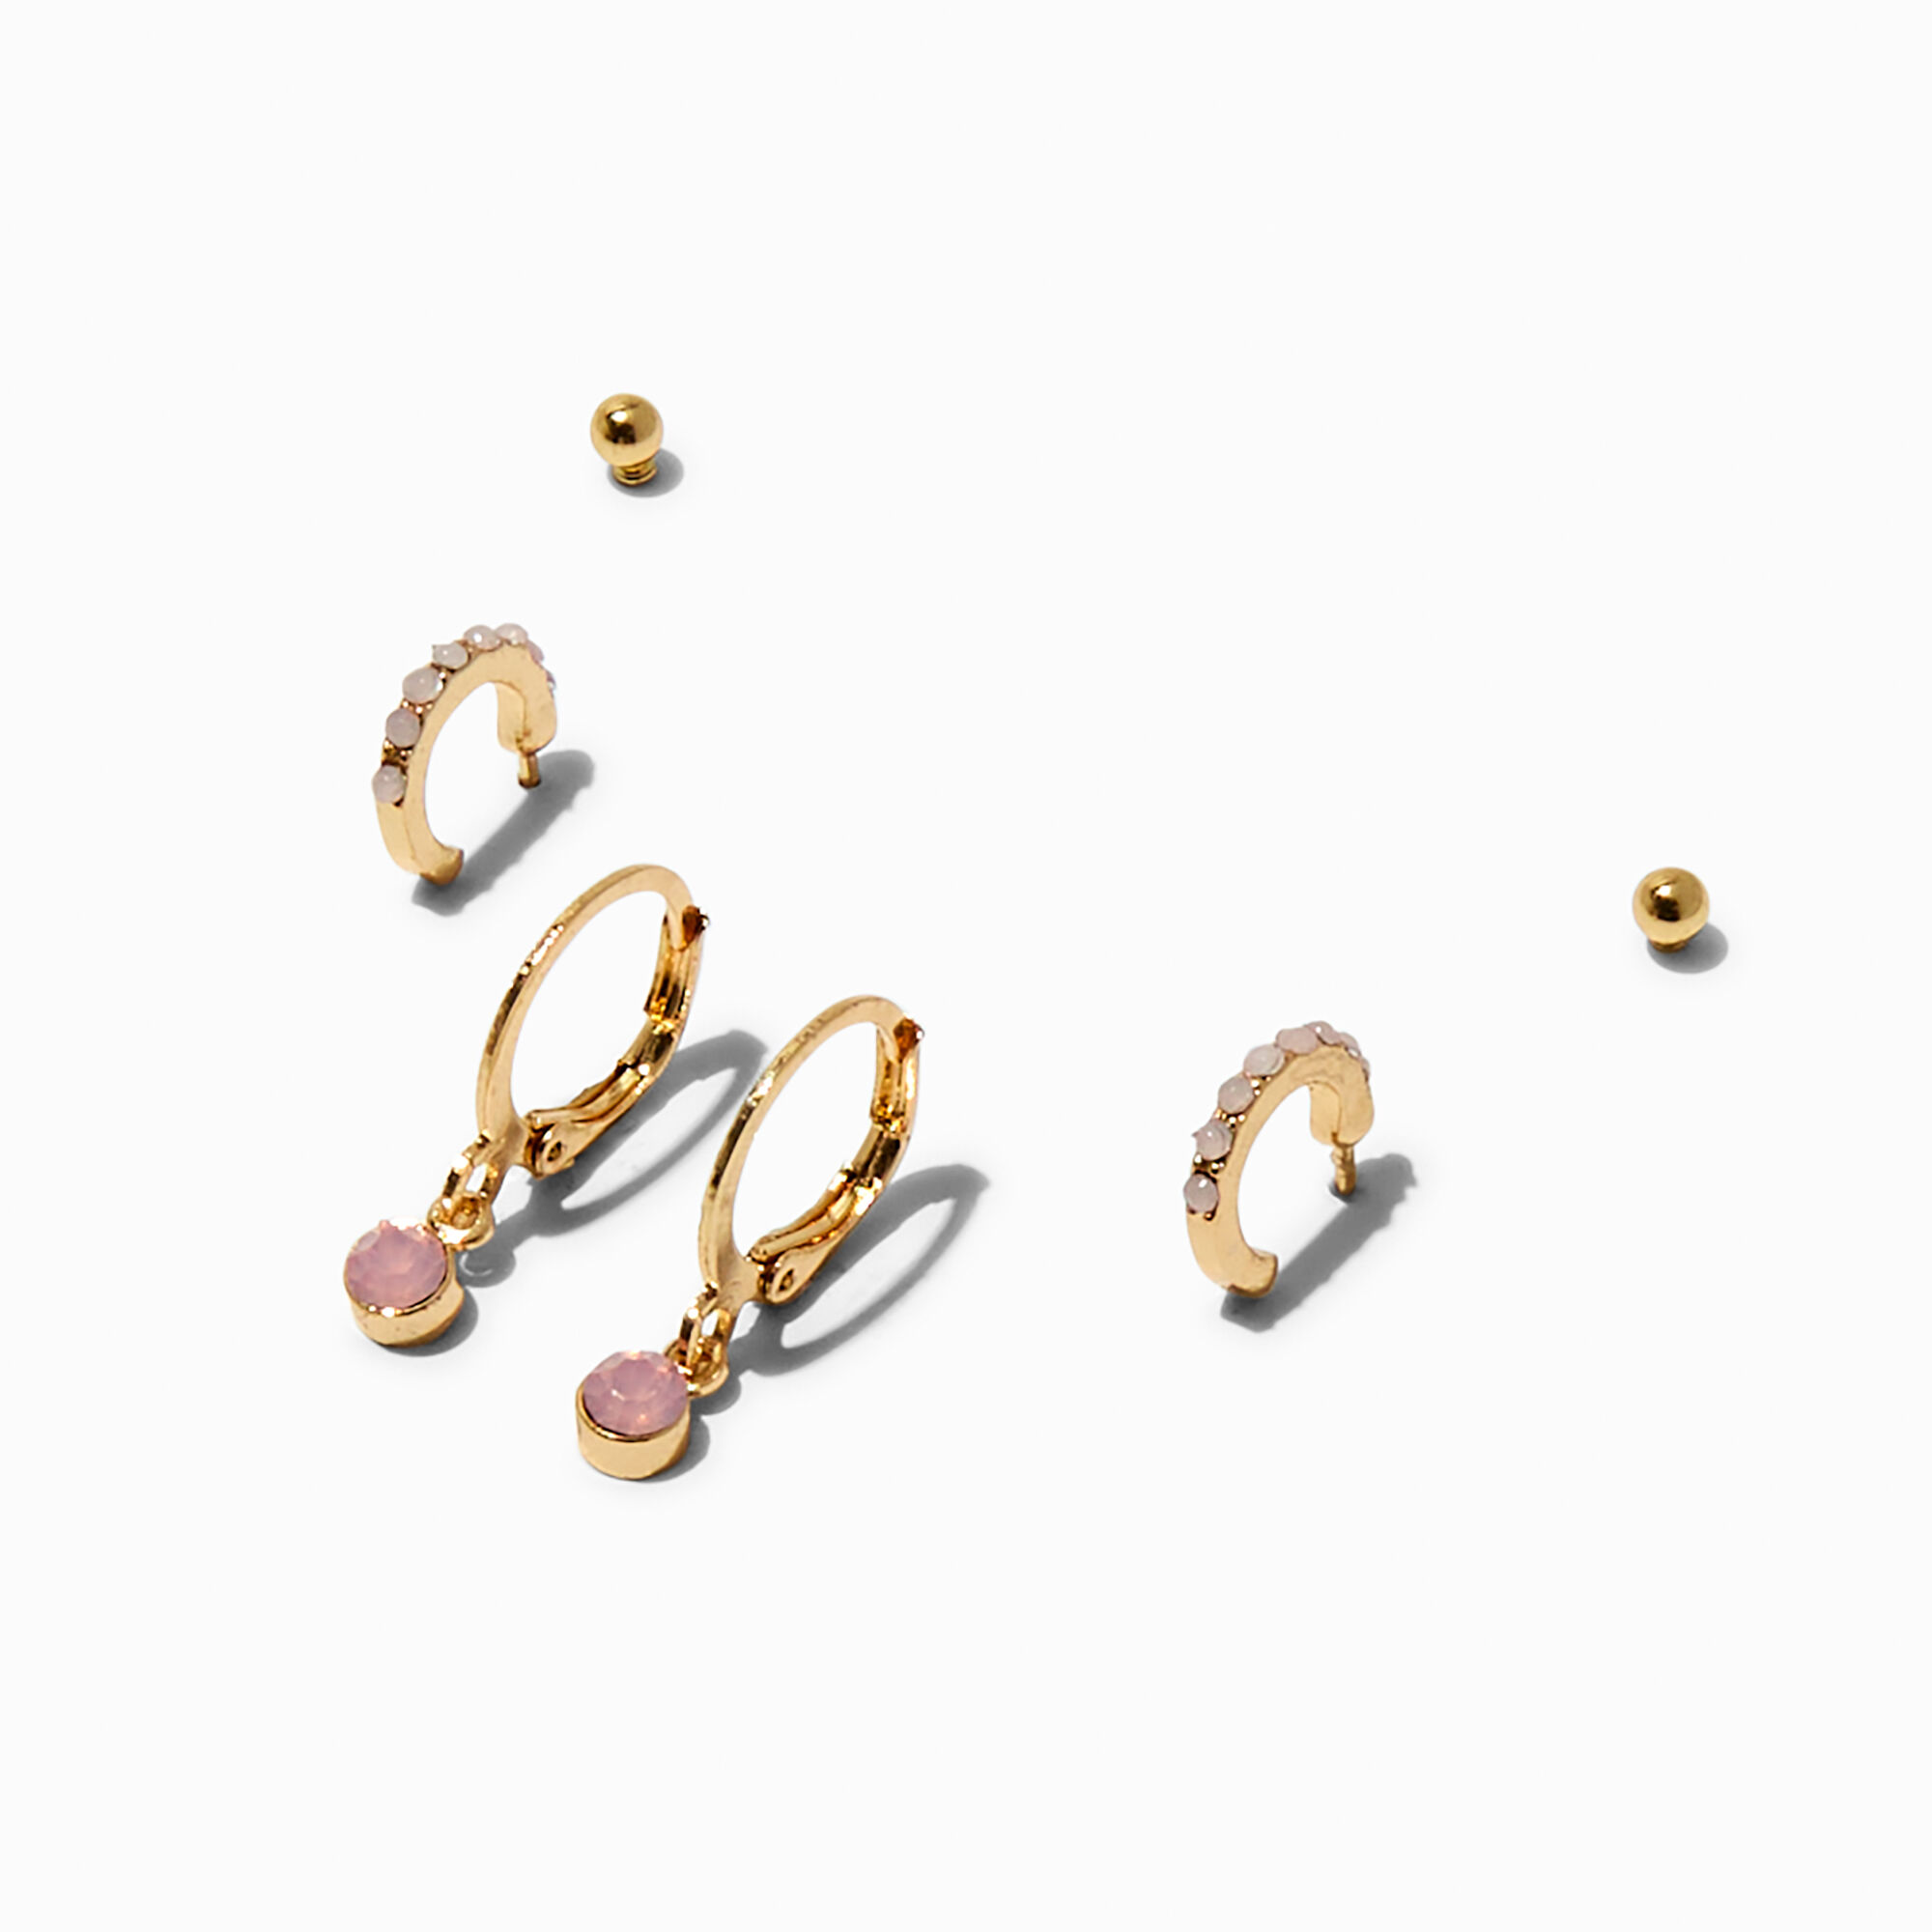 View Claires GoldTone Stone Earring Stackables Set 3 Pack Pink information